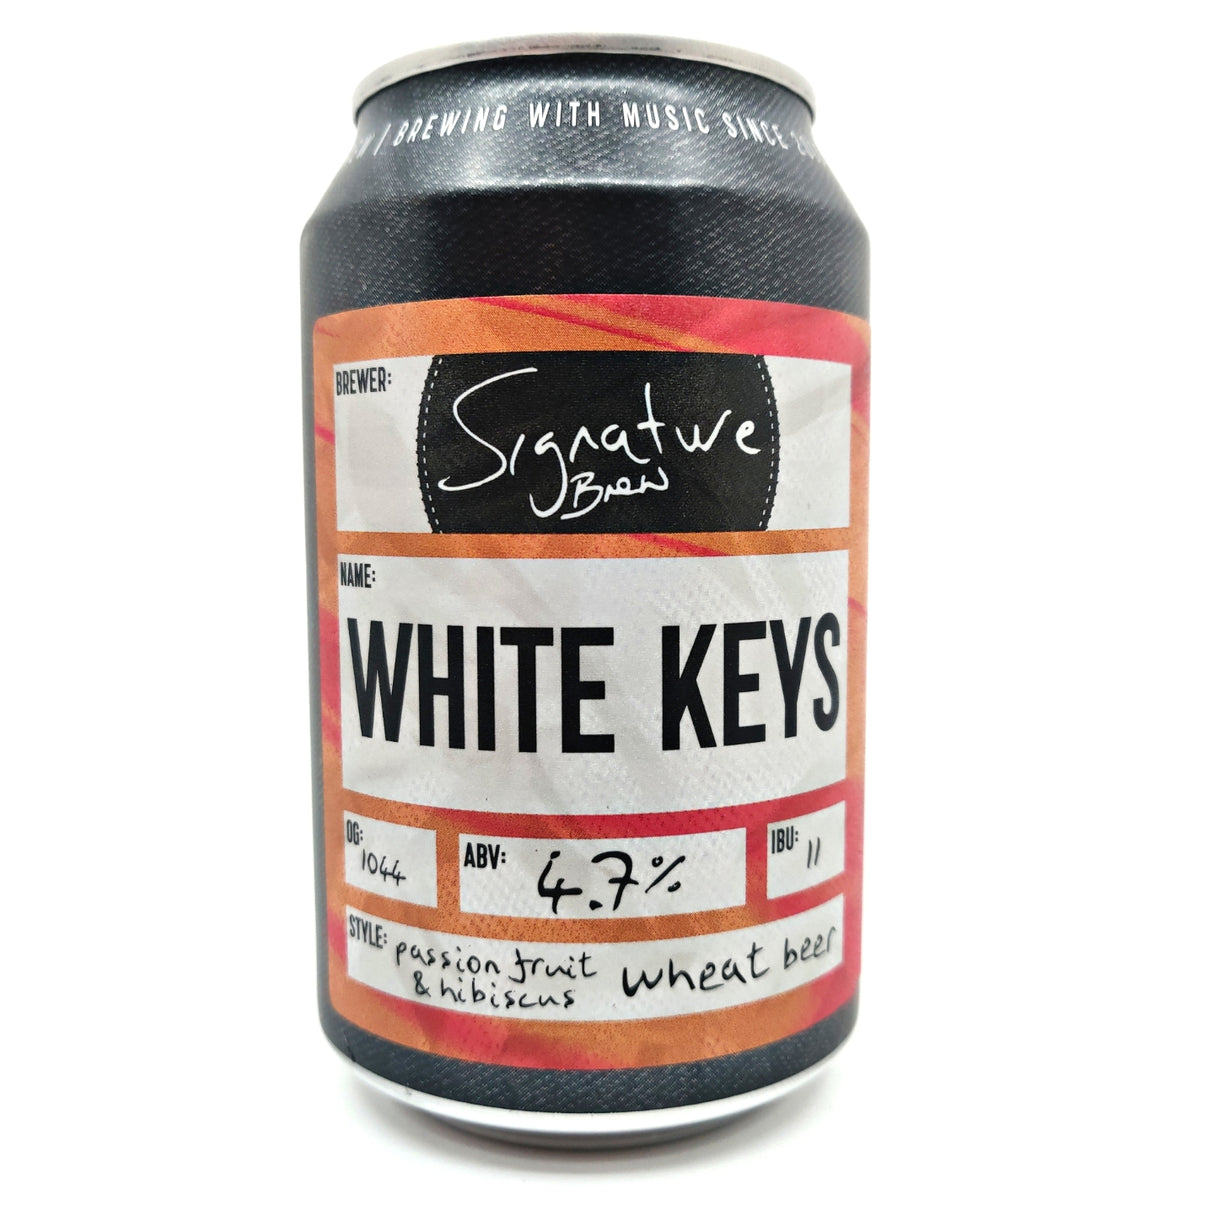 Signature Brew White Keys Passionfruit & Hibiscus Wheat Beer 4.7% (330ml can)-Hop Burns & Black